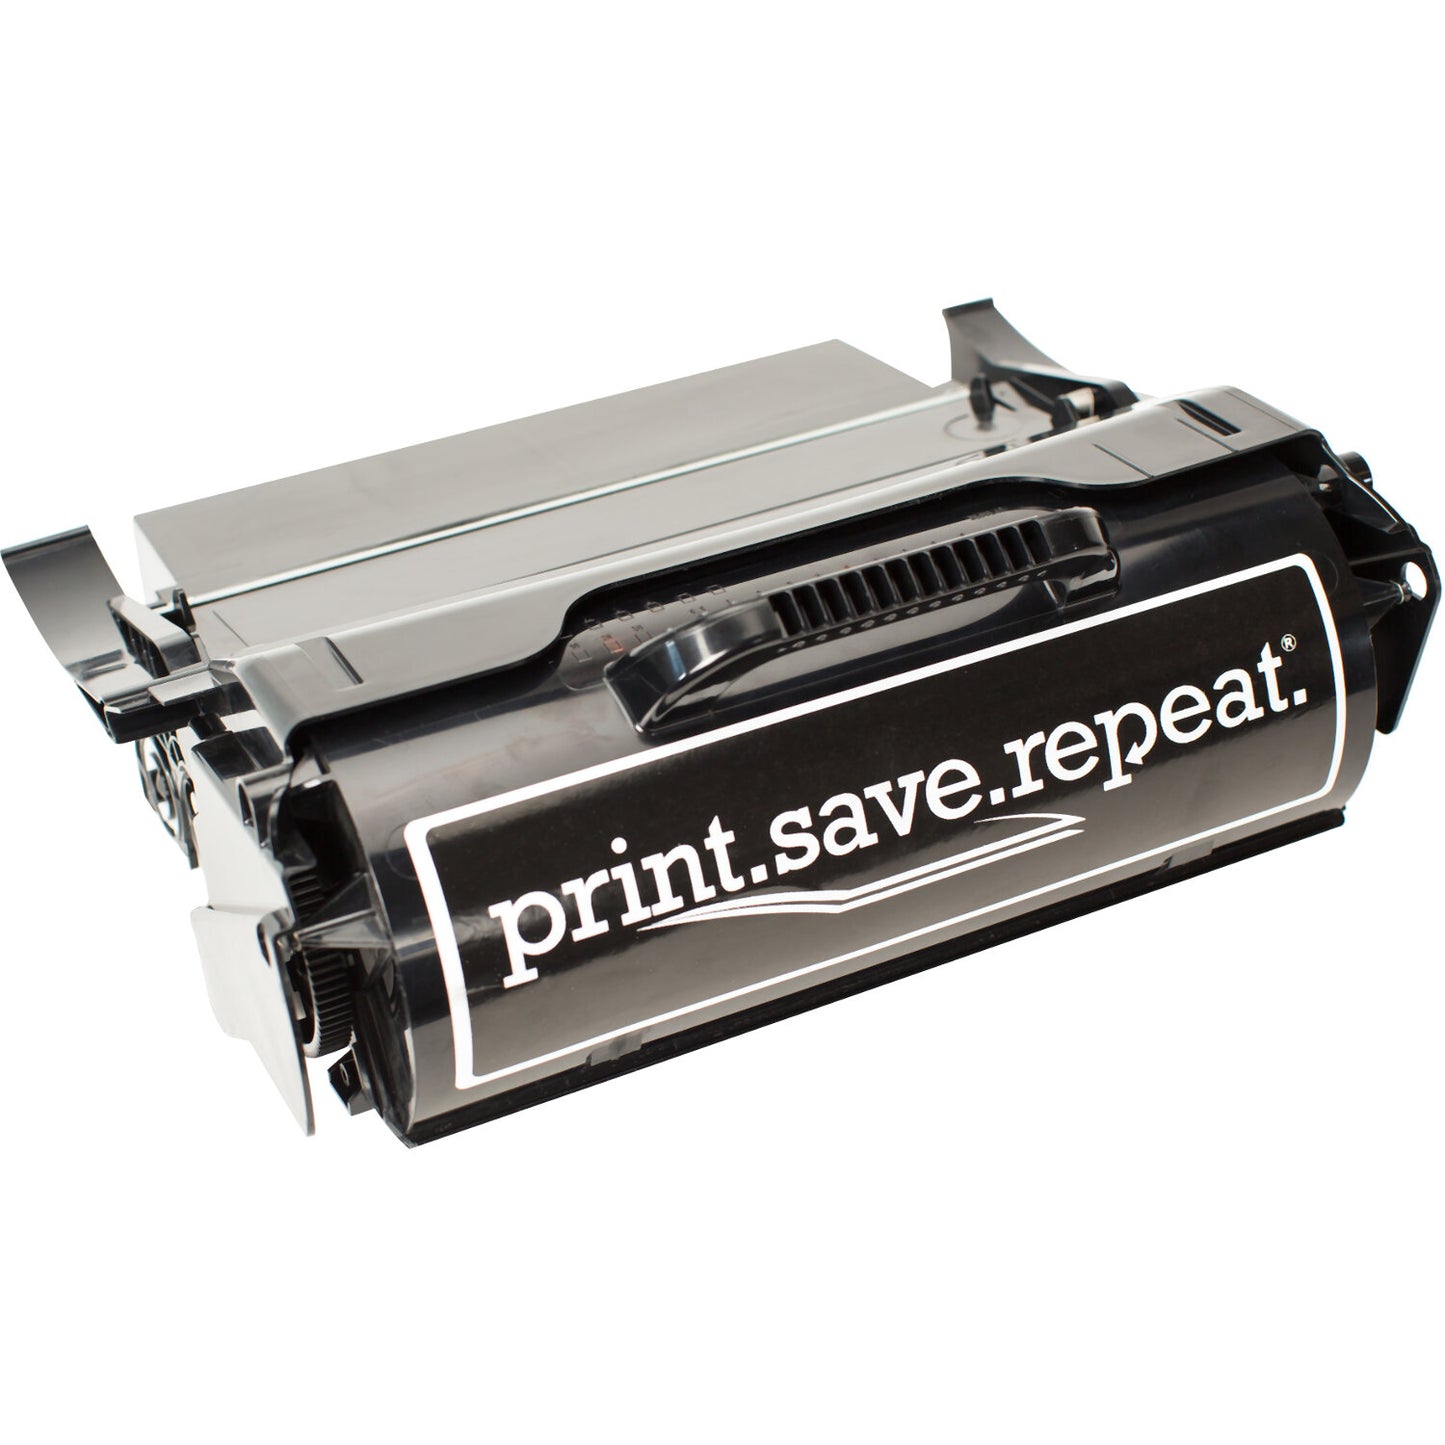 Print.Save.Repeat. Lexmark X651A11A Remanufactured Toner Cartridge for X651, X652, X654, X656, X658 [7,000 Pages]